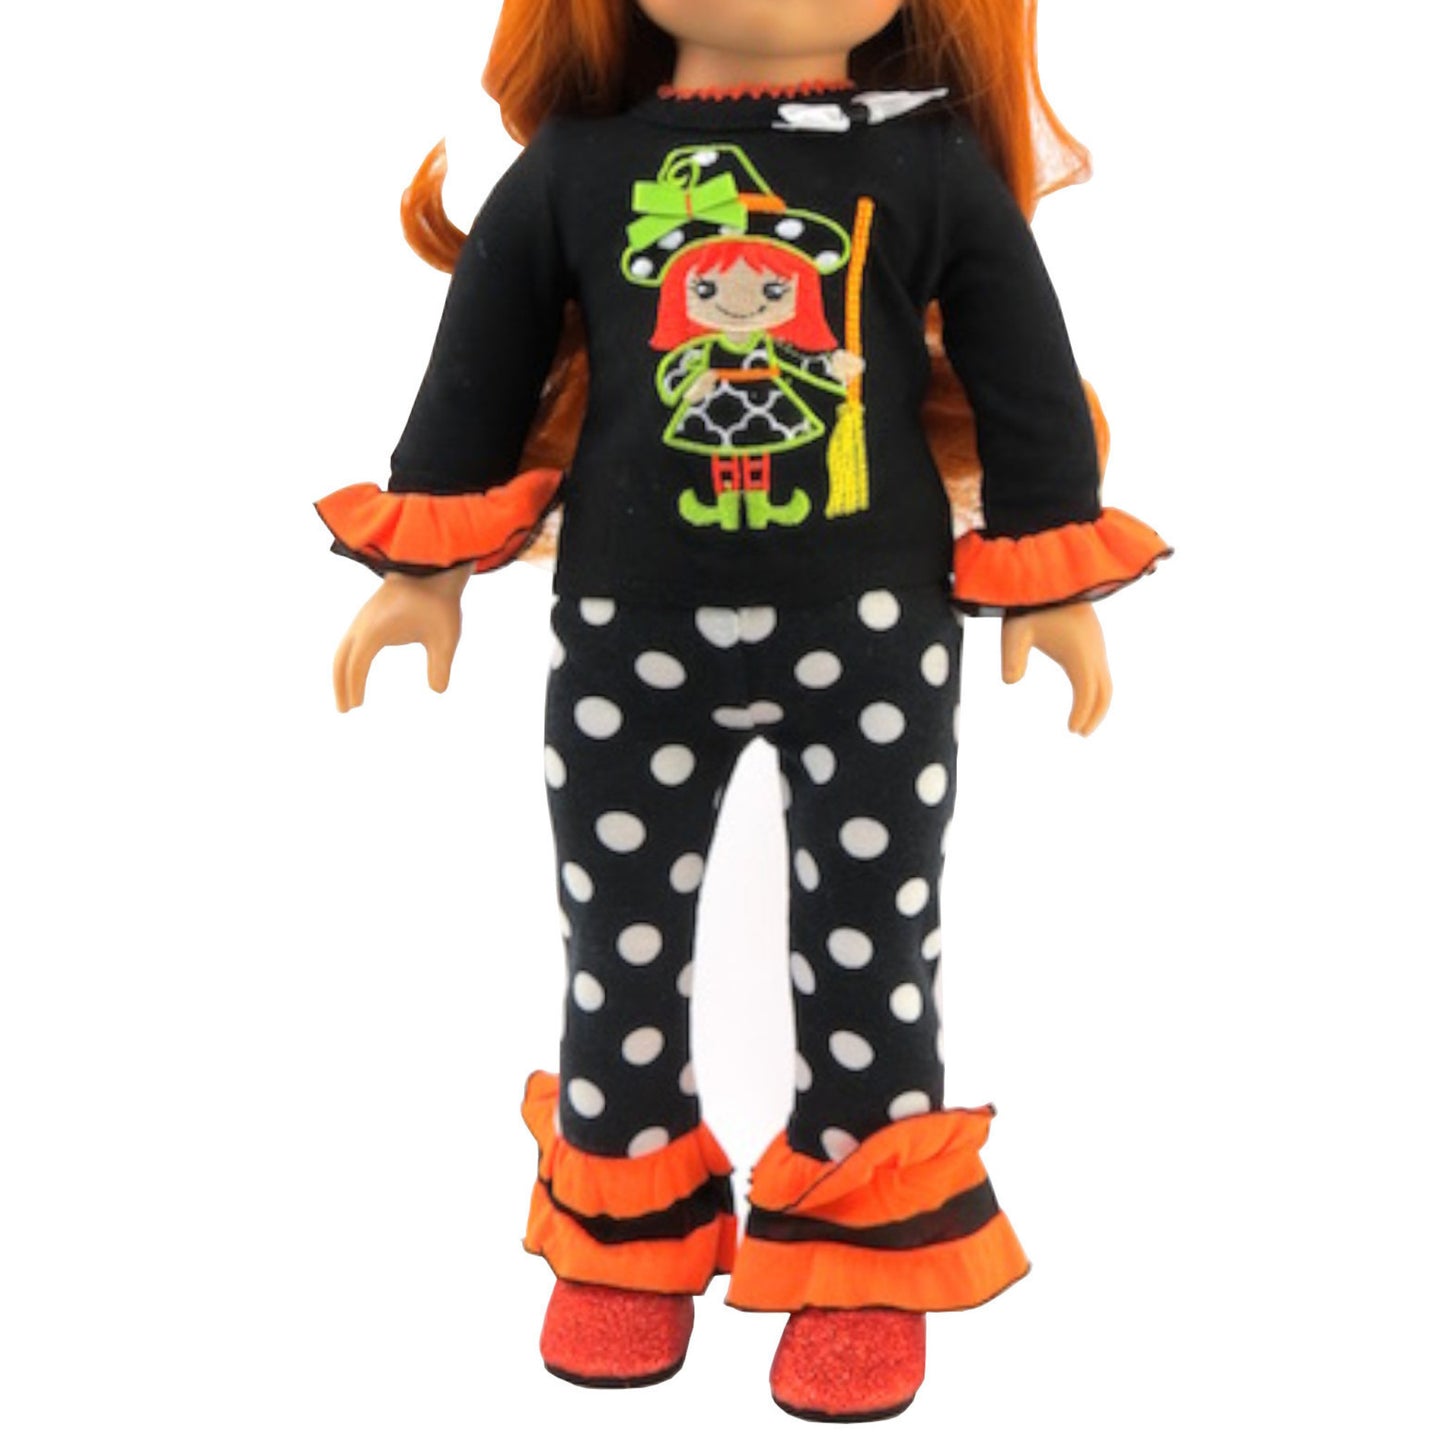 Little Witch Polka Dot Pant Set for 18-inch dolls with doll Front